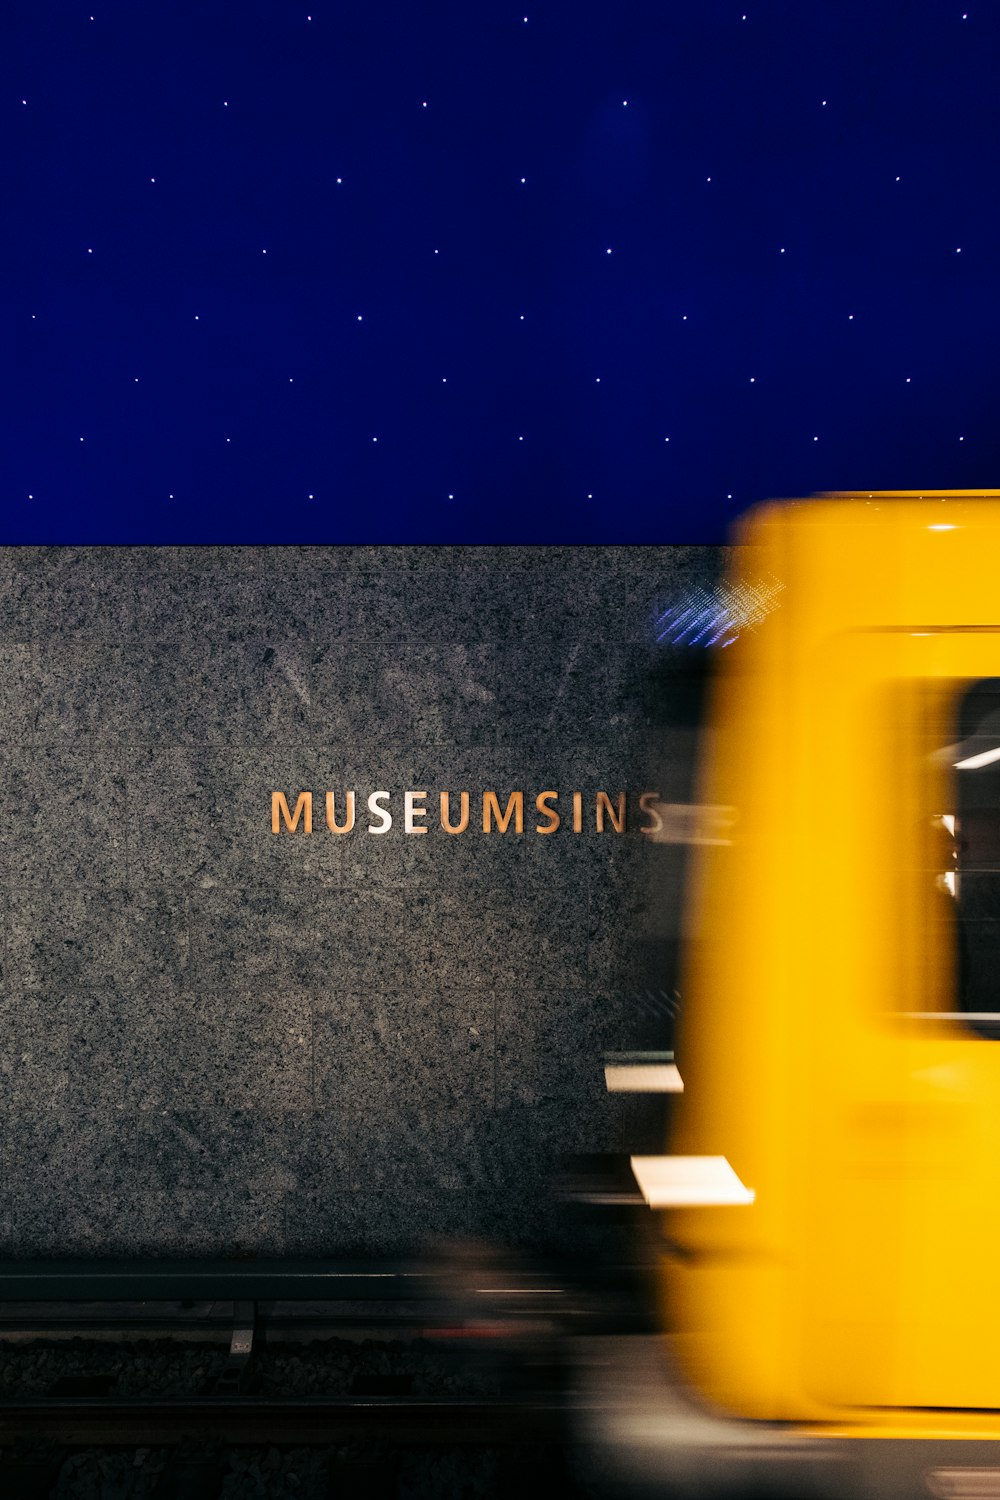 a yellow train traveling past a museum sign